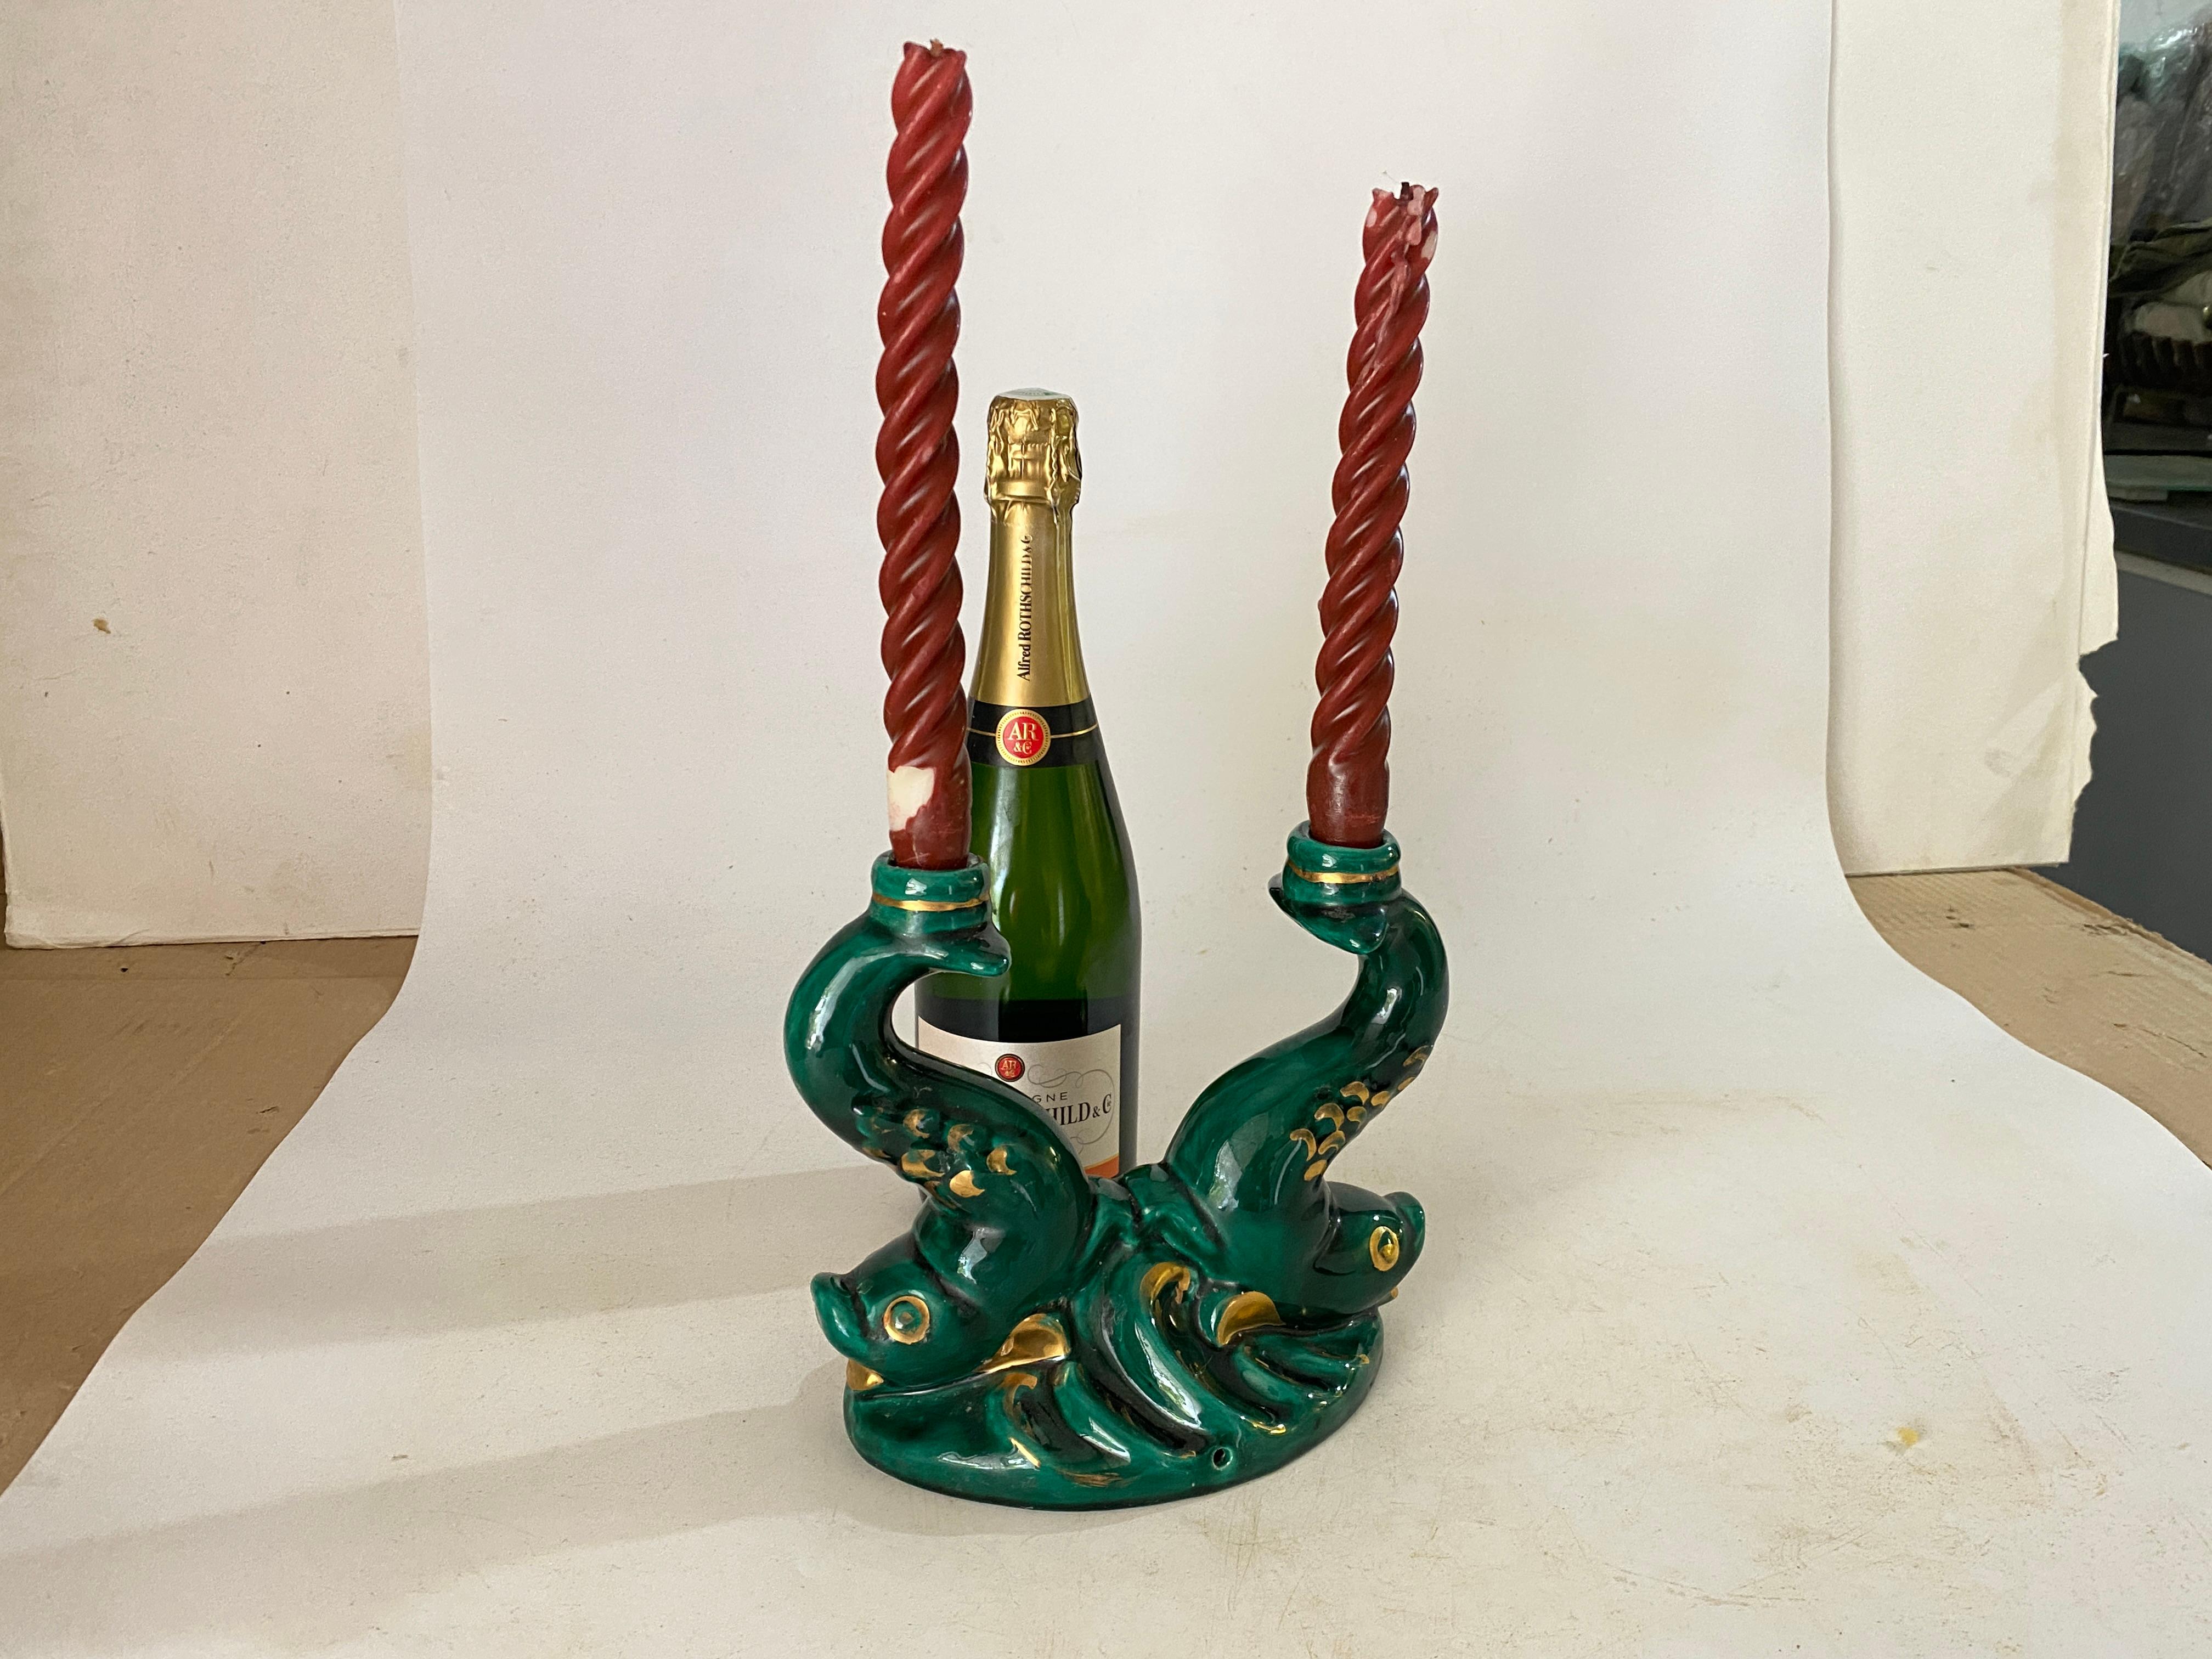 This is a pair of Candle Holder . It has been made in France circa 1970.
The color is Green

The size does not include includes the candles Height.